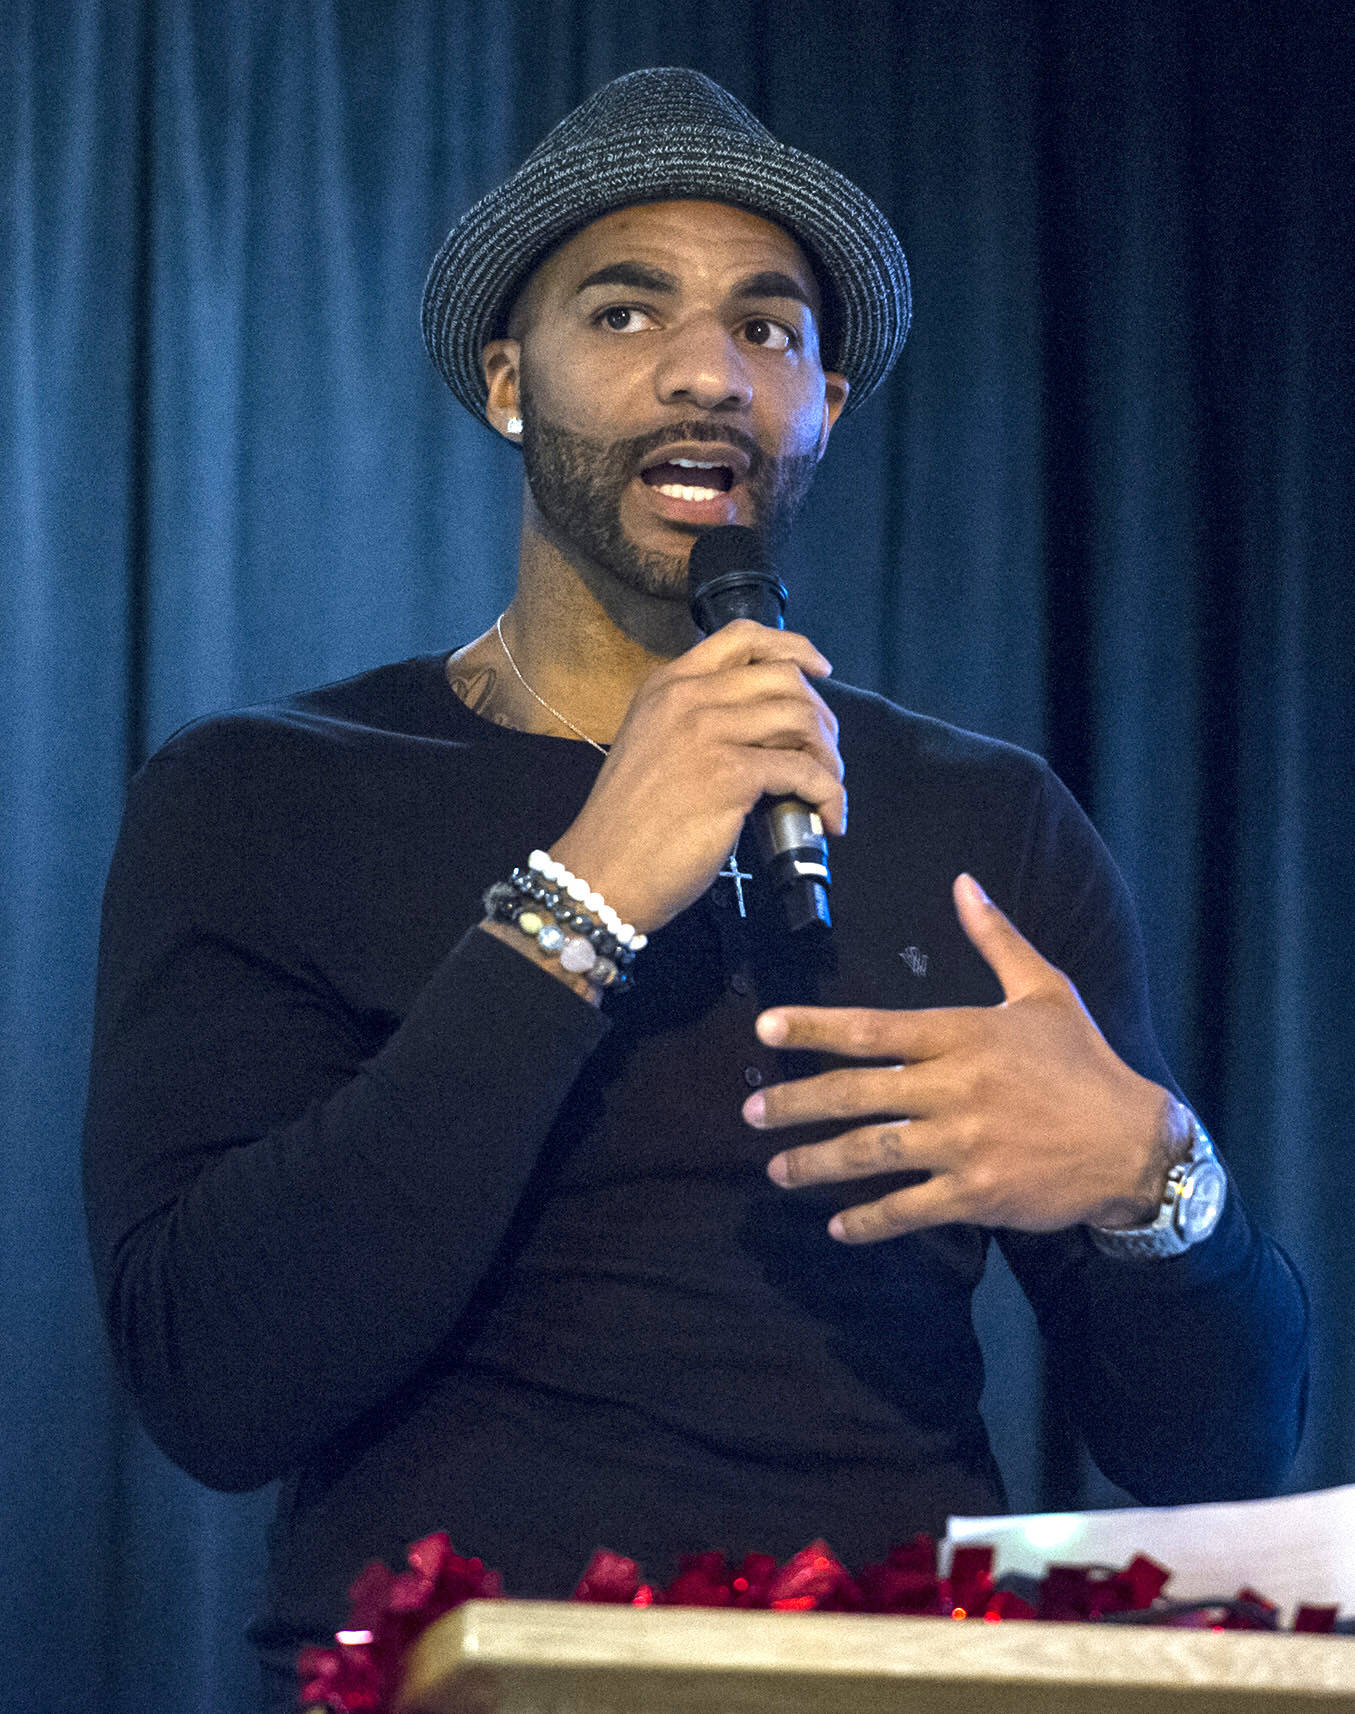 In this file photo from May 2016, retired NBA player and former Juneau-Douglas High School star Carlos Boozer makes a surprise visit during the JDHS Basketball Awards Banquet at the Elizabeth Peratrovich Hall. Boozer will be hosting the “Carlos Boozer Basketball Camp” from Aug. 4-9 at JDHS. (Michael Penn | Juneau Empire File)